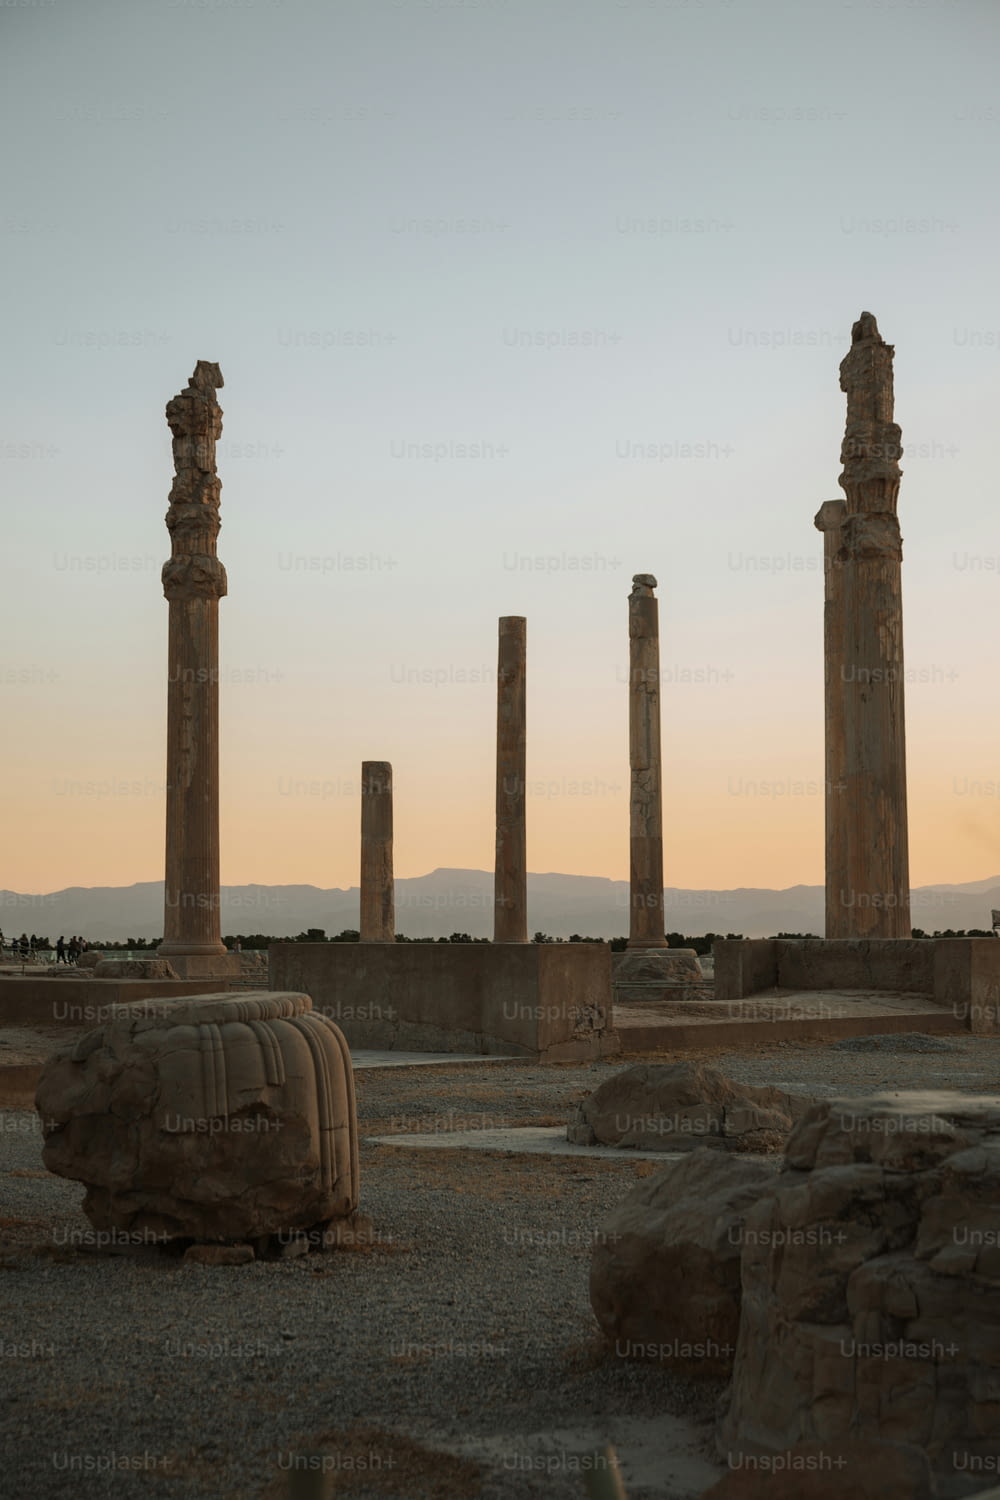 a group of stone pillars sitting in the middle of a desert